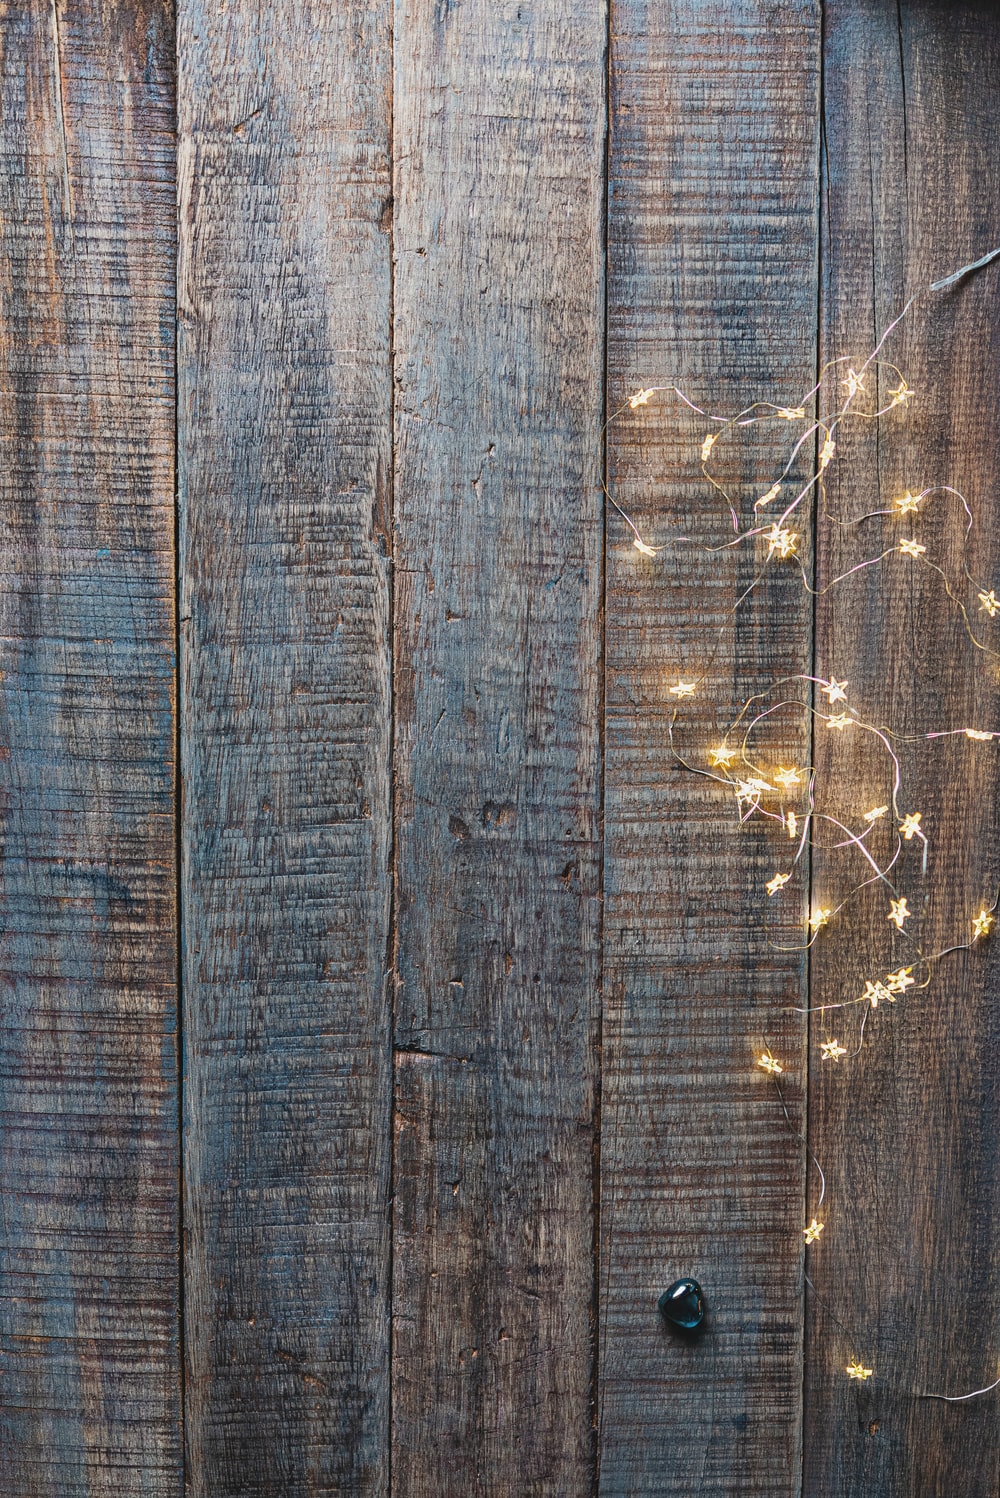 Rustic Wood Picture. Download Free Image